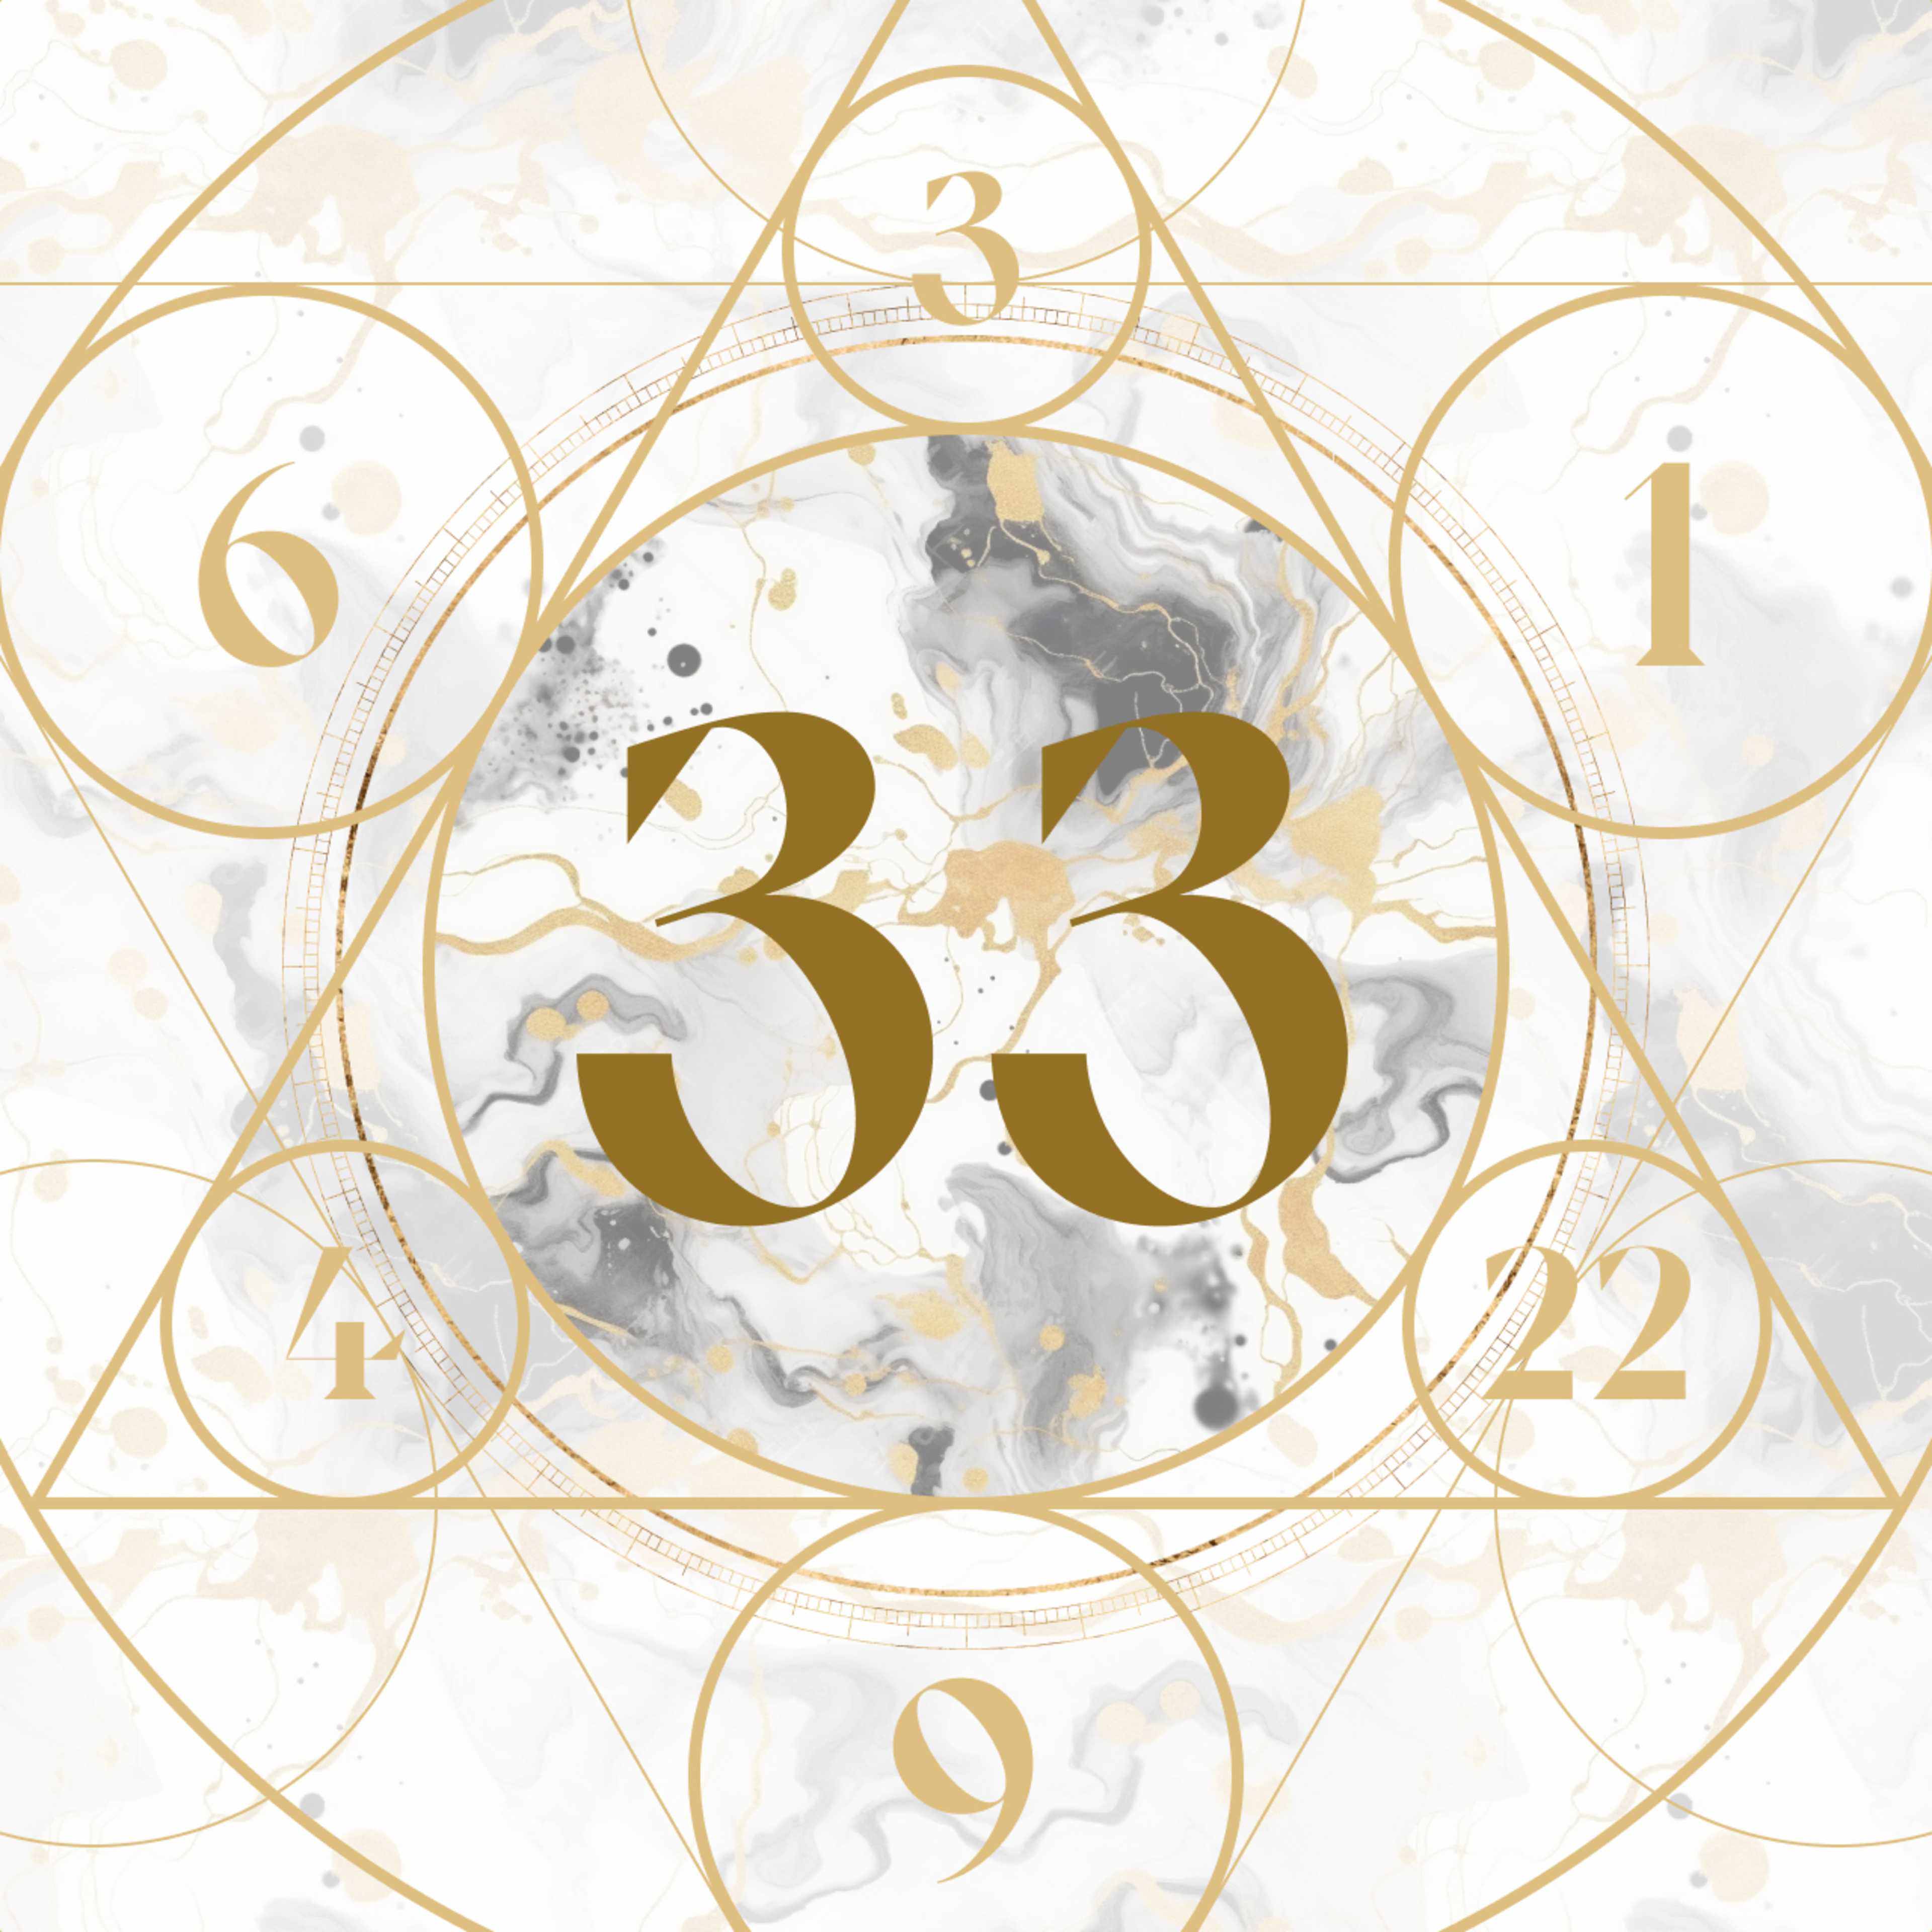 Life Path Number 33 Meaning